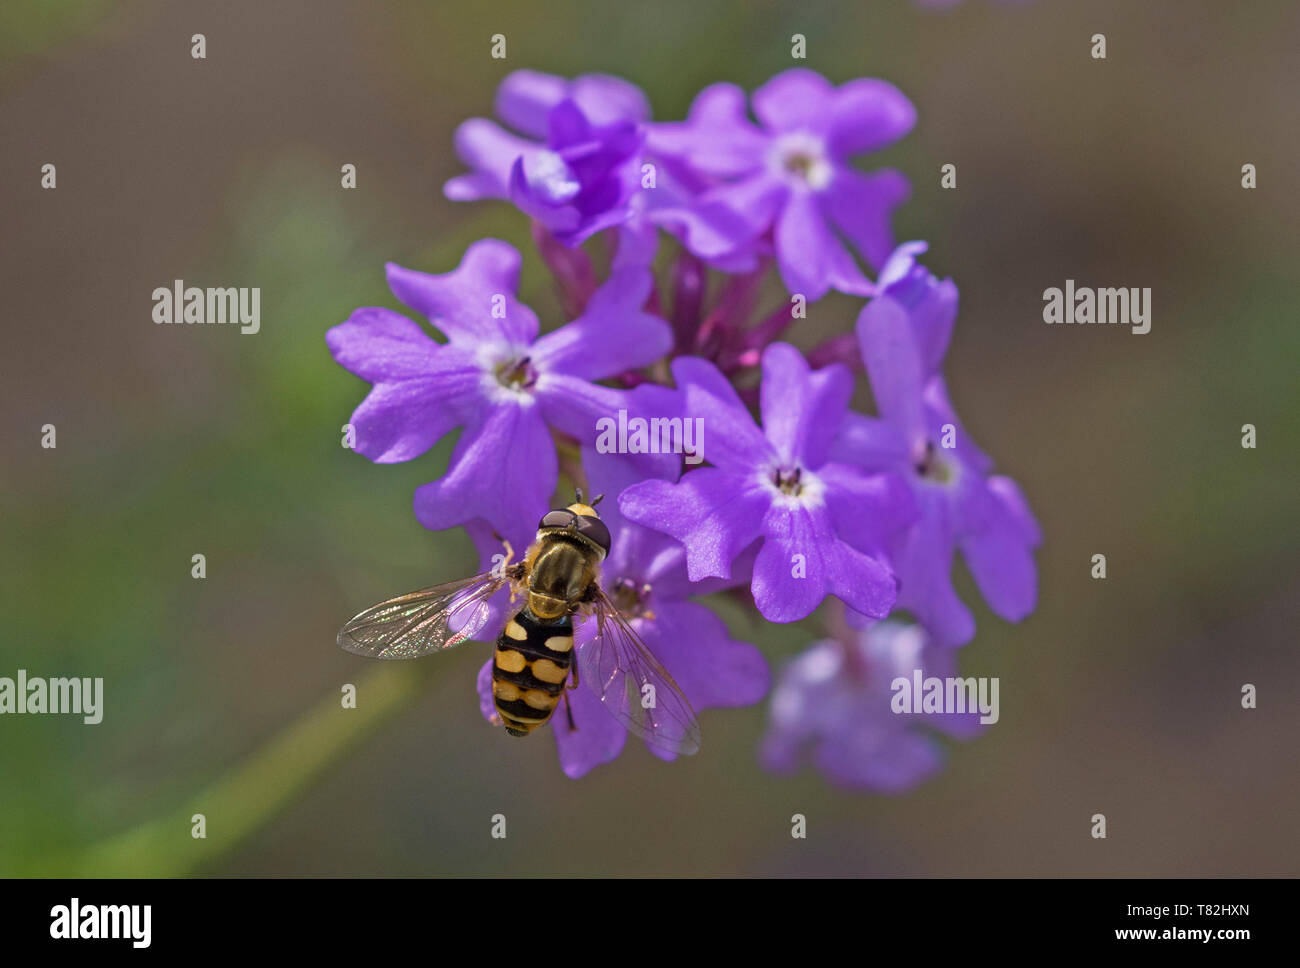 Close-up detail of a hover fly eupeodes corolla on purple Elizabeth Earle flowers Primula allionii in garden during spring Stock Photo